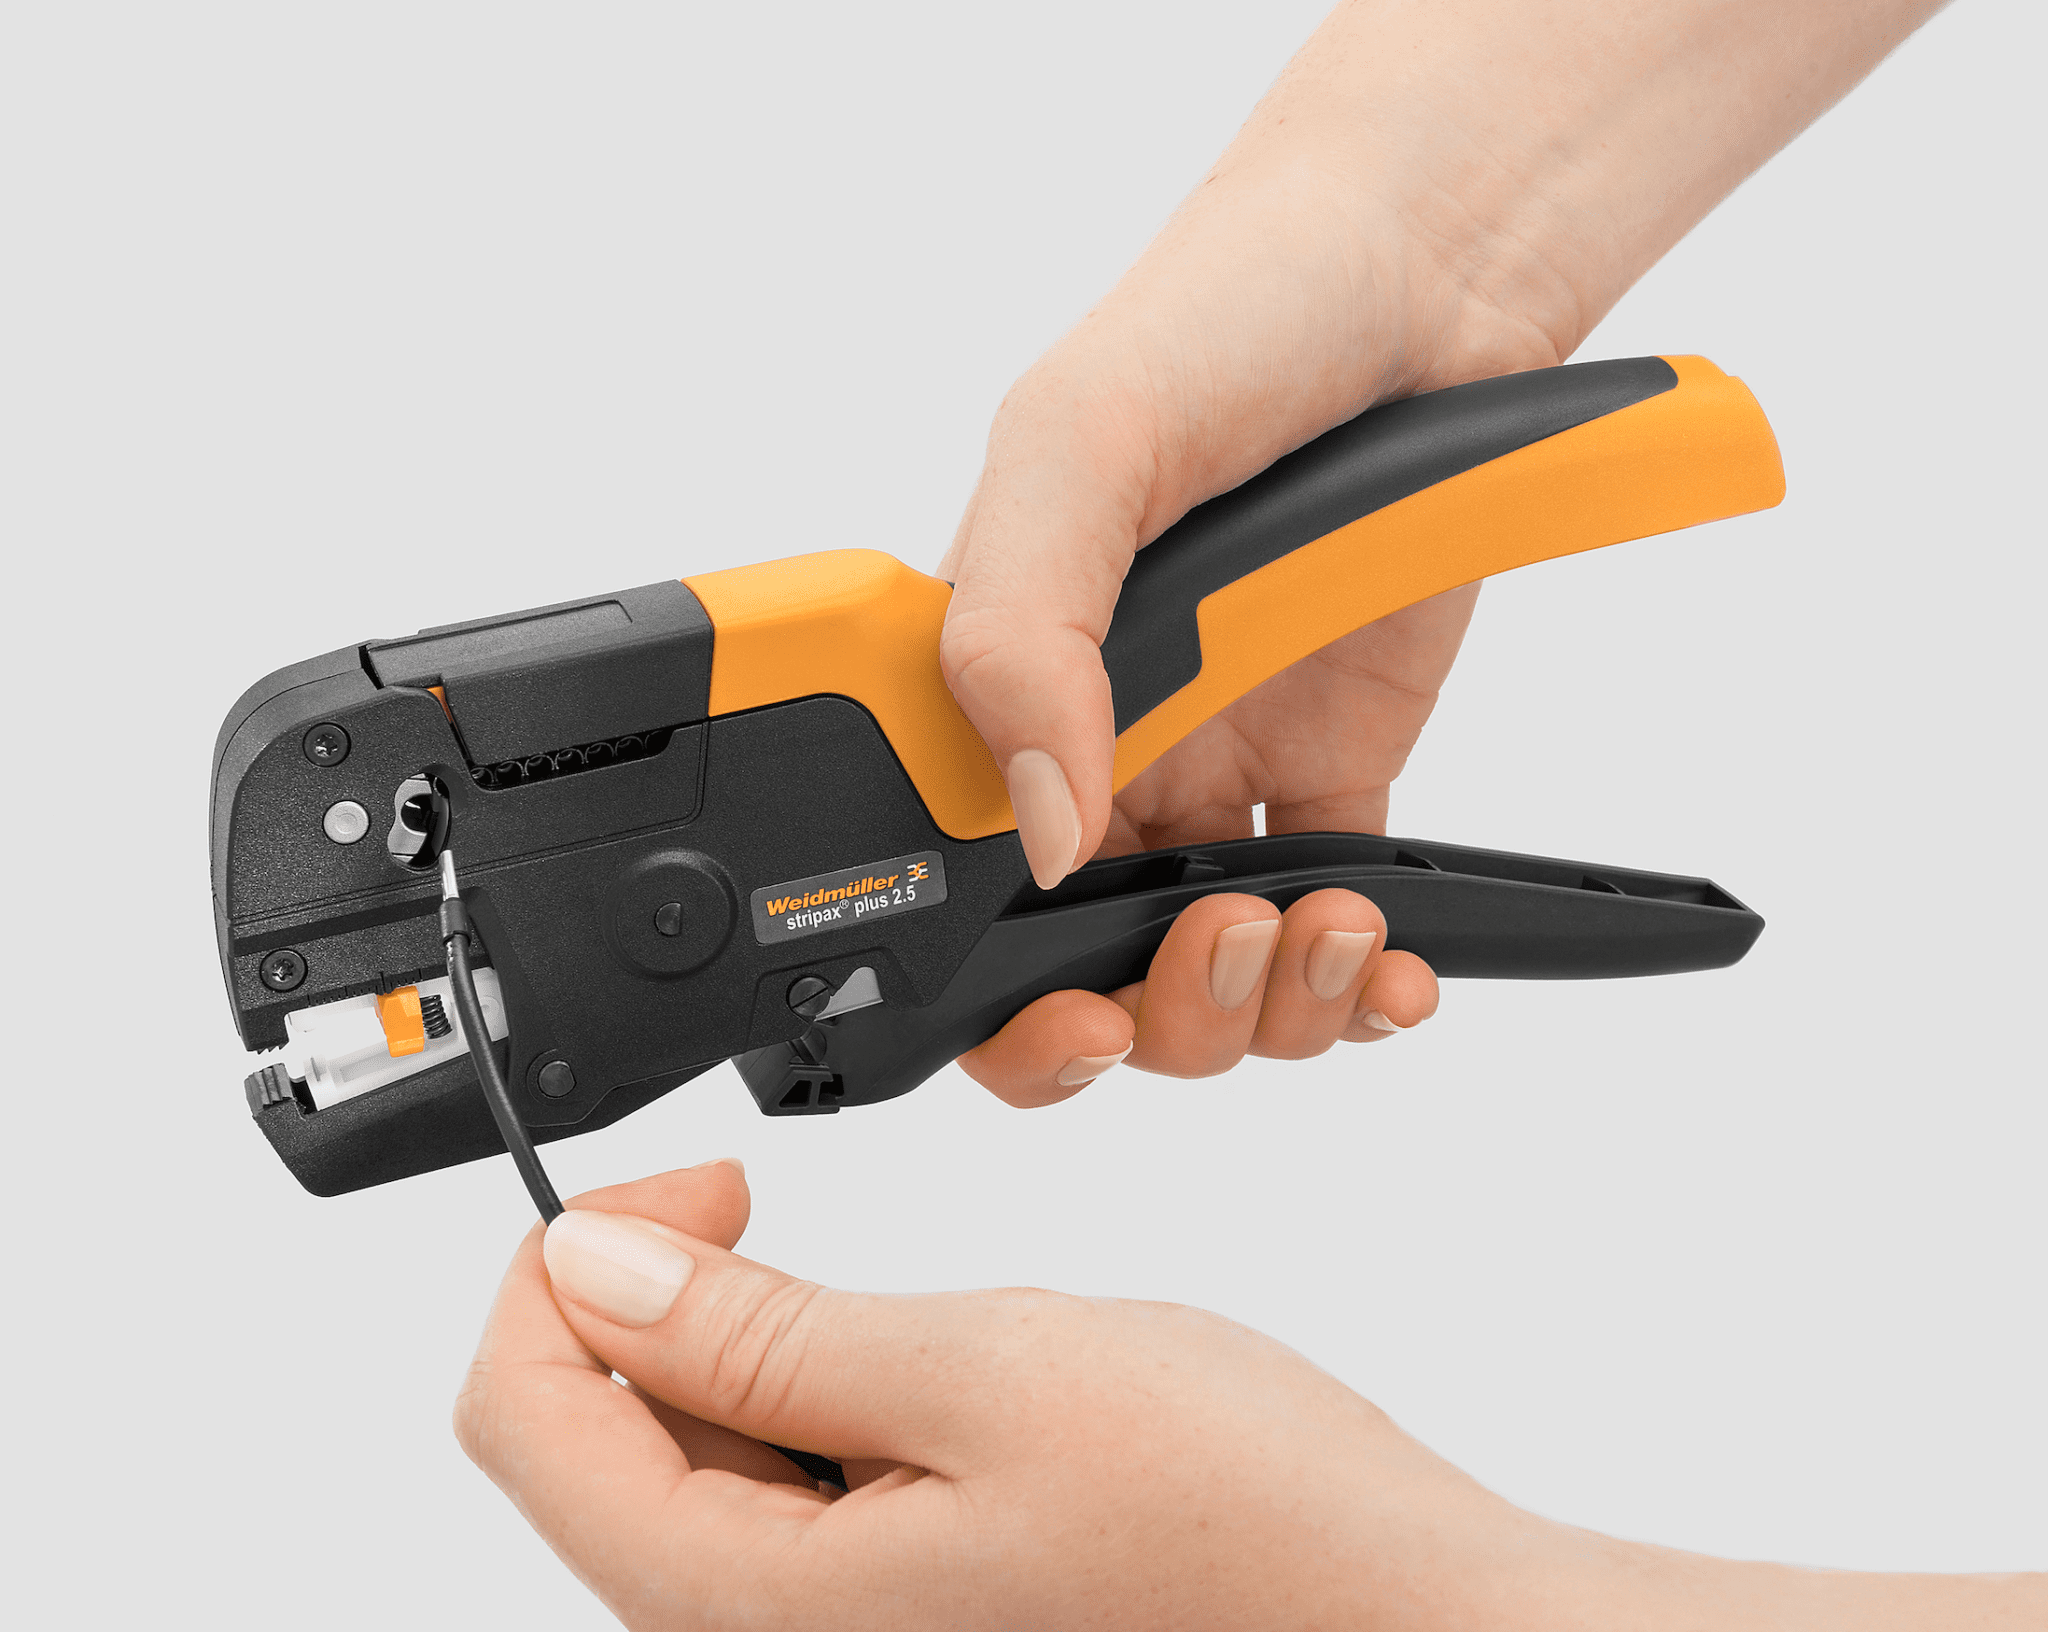 Weidmuller USA unveiled the new stripax plus tool